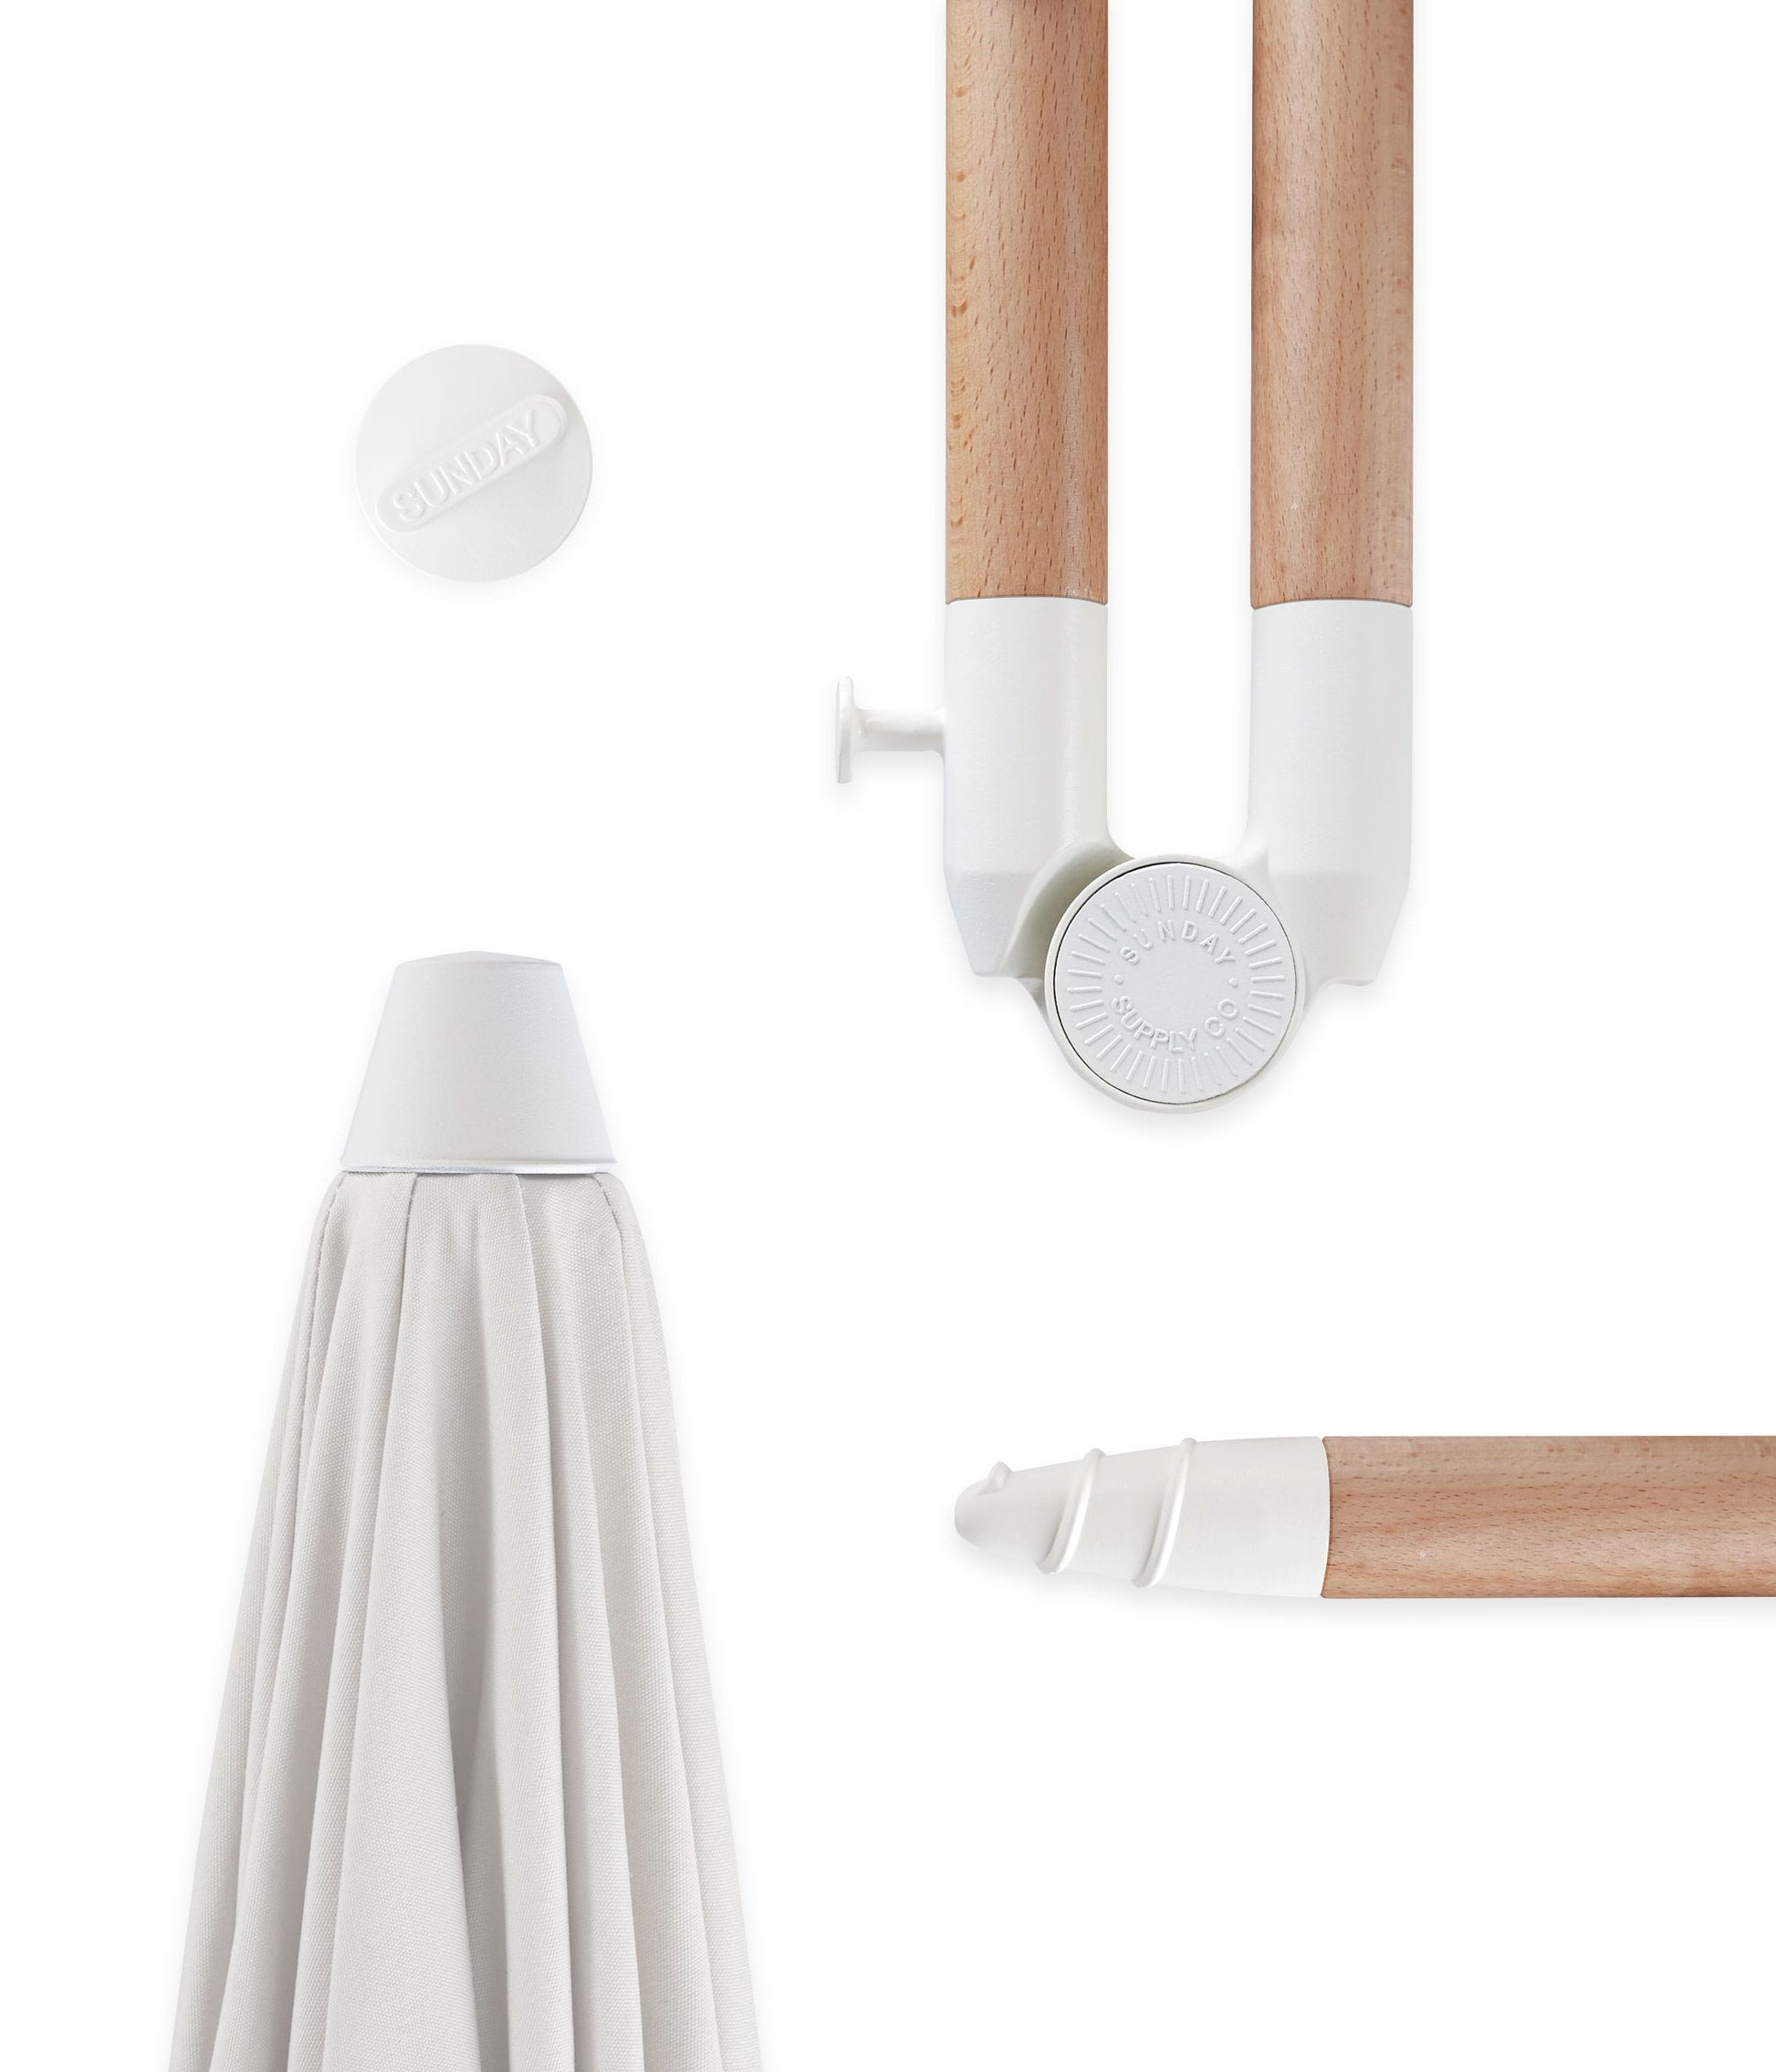 Close up on a Sunday Supply Co beach umbrella's joints and hardware details